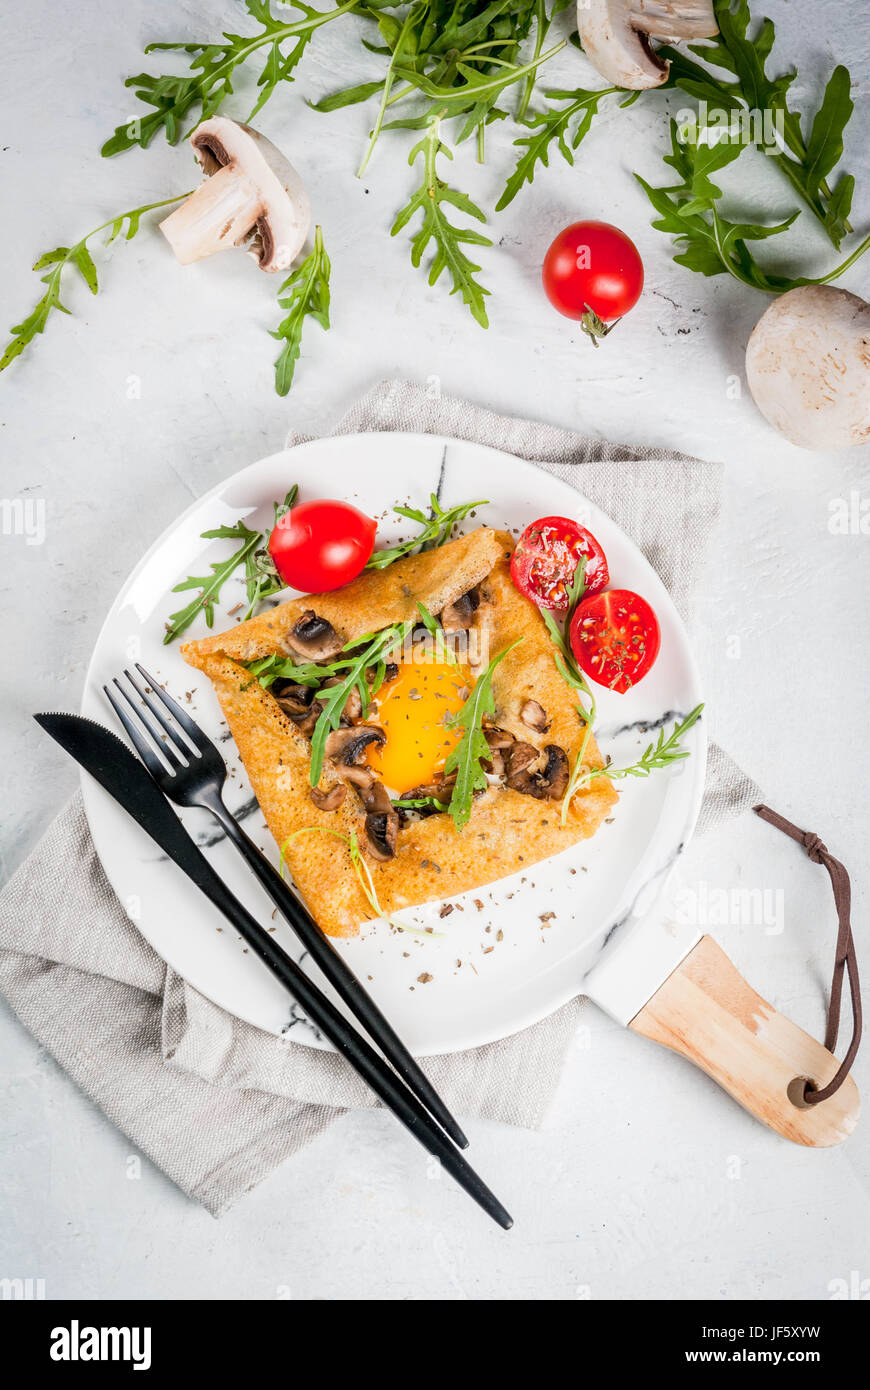 French cuisine. Breakfast, lunch, snacks. Vegan food. Traditional dish galette sarrasin. Crepes with eggs, cheese, fried mushrooms, arugula leaves and Stock Photo